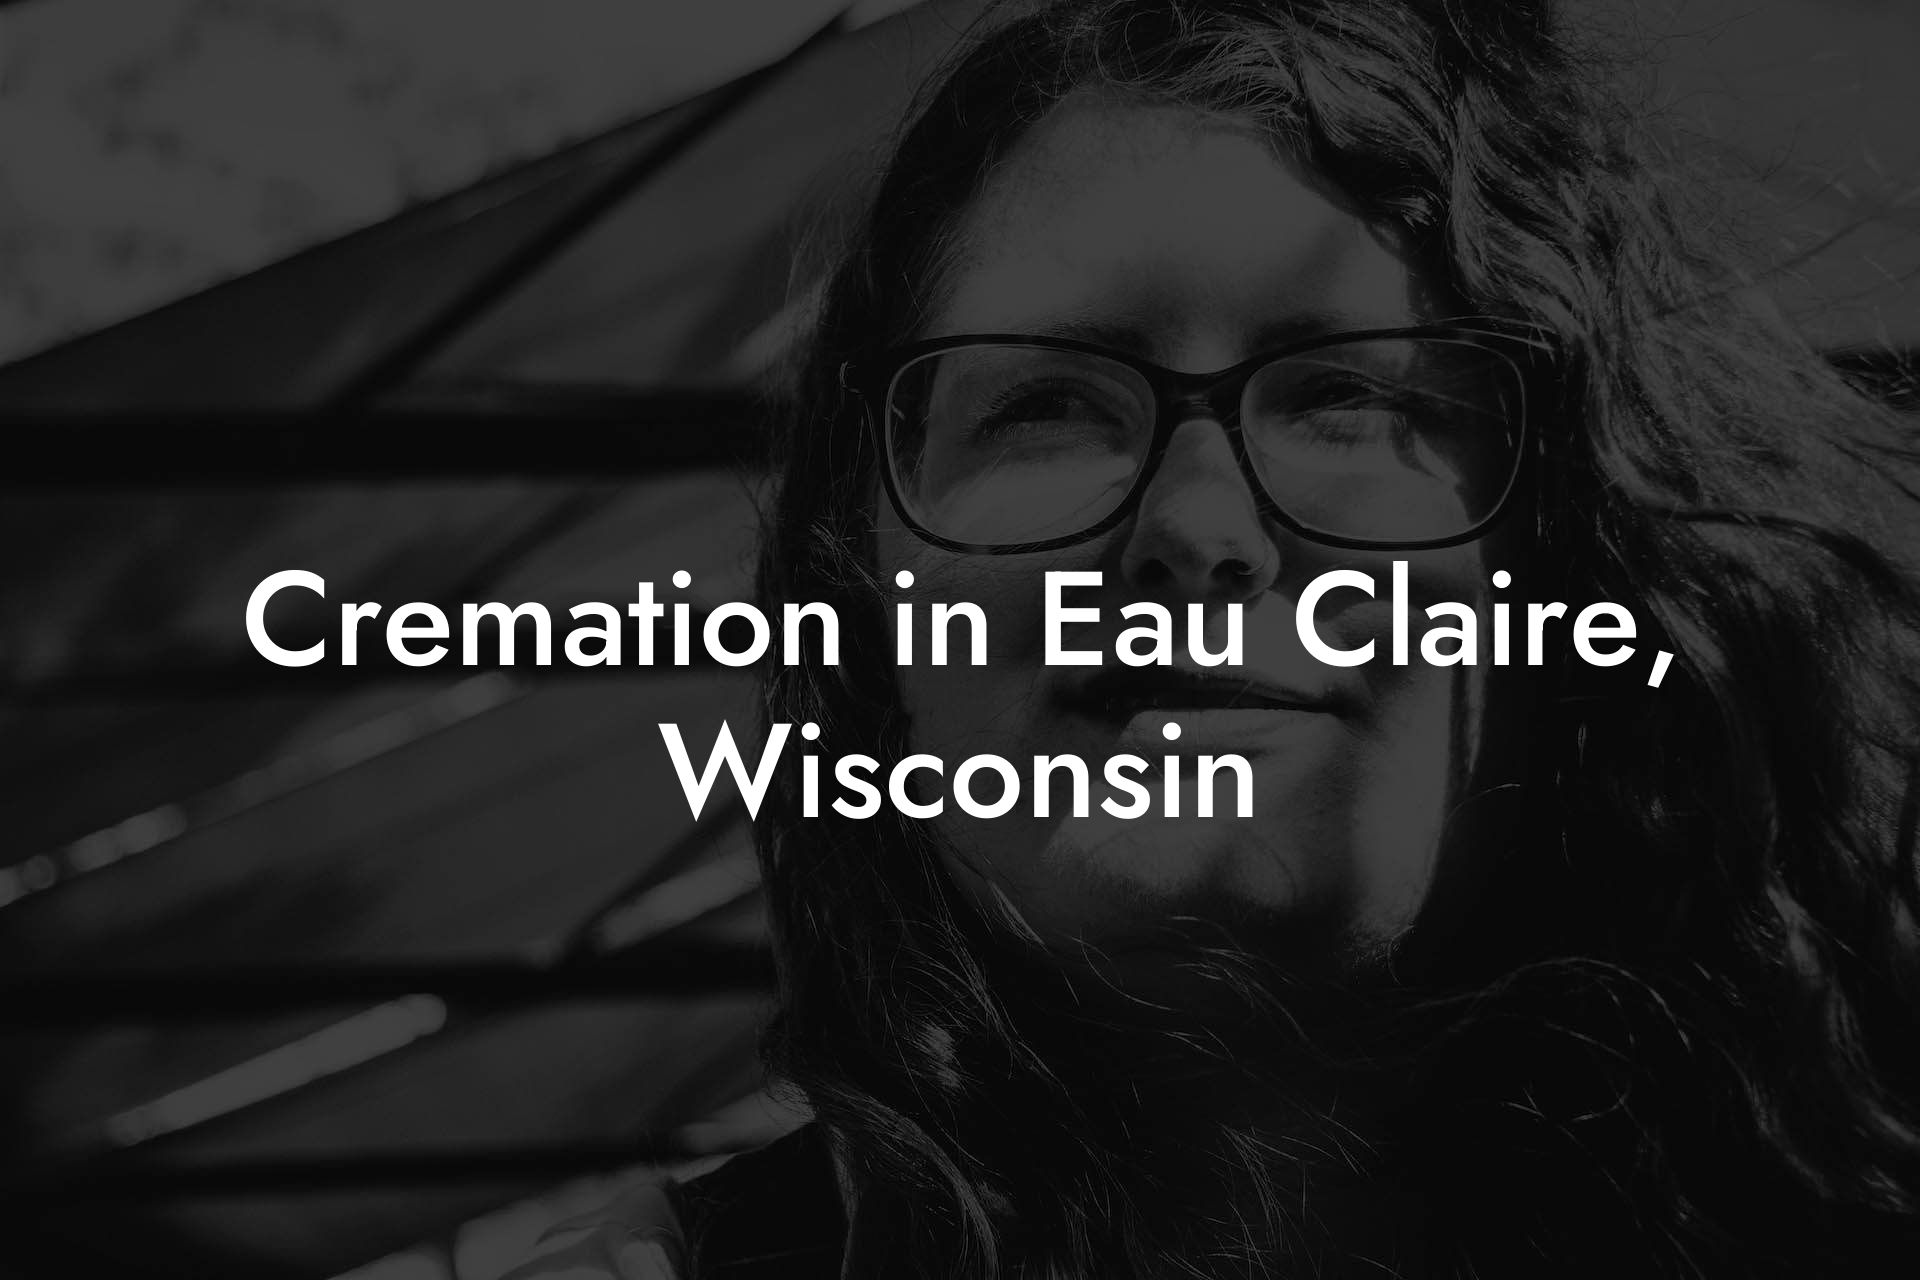 Cremation in Eau Claire, Wisconsin